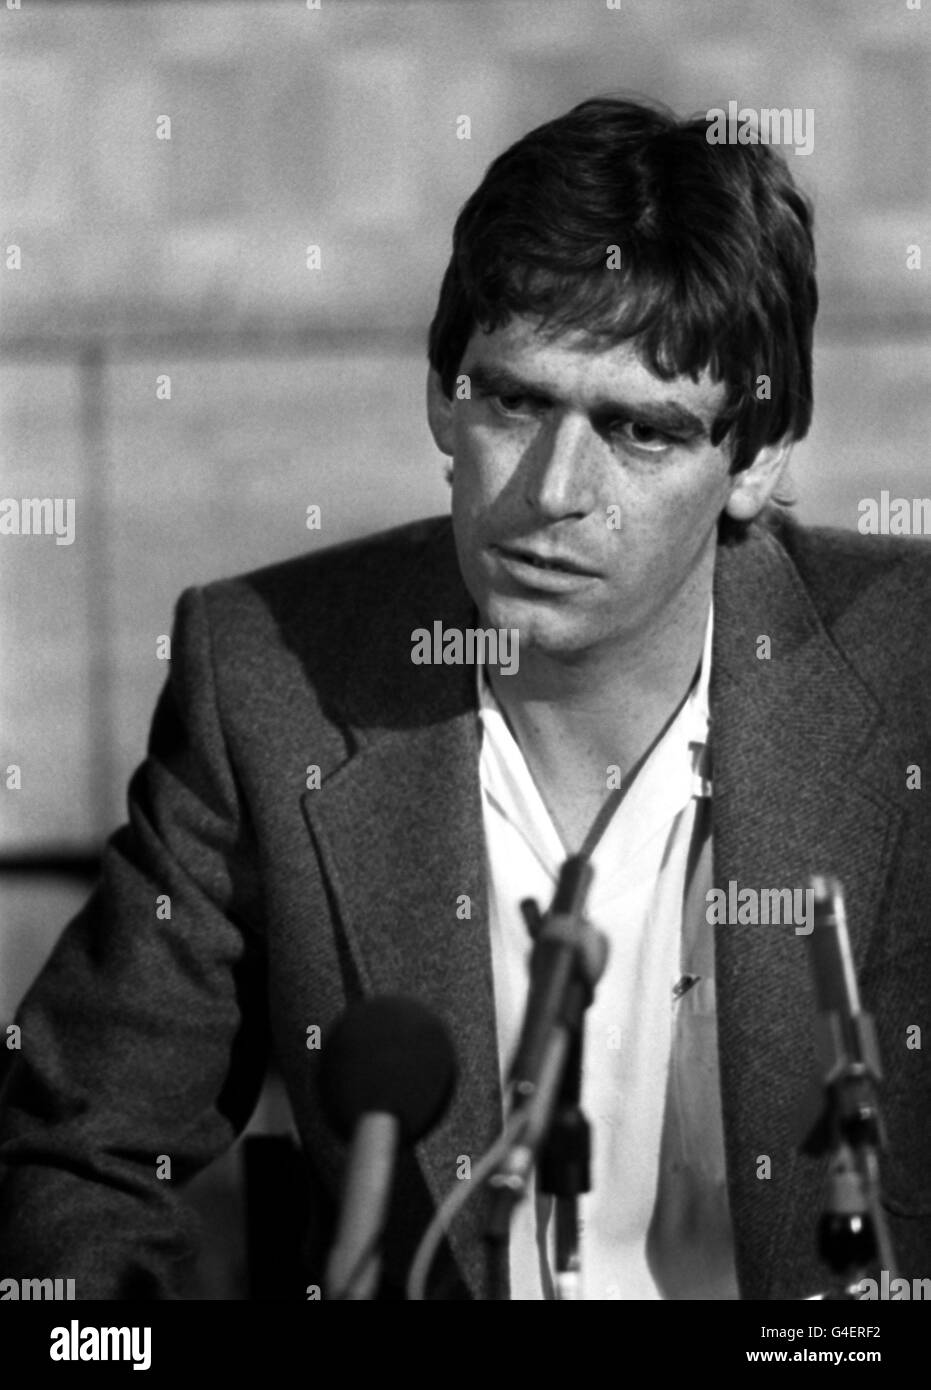 PA NEWS PHOTO 30/5/84 PAUL BROWN, FATHER OF MISSING 15 DAY OLD DOWN SYNDROME BABY LOUISE BROWN AT A PRESS CONFERENCE IN LONDON IN AN APPEAL FOR HER SAFE RETURN Stock Photo